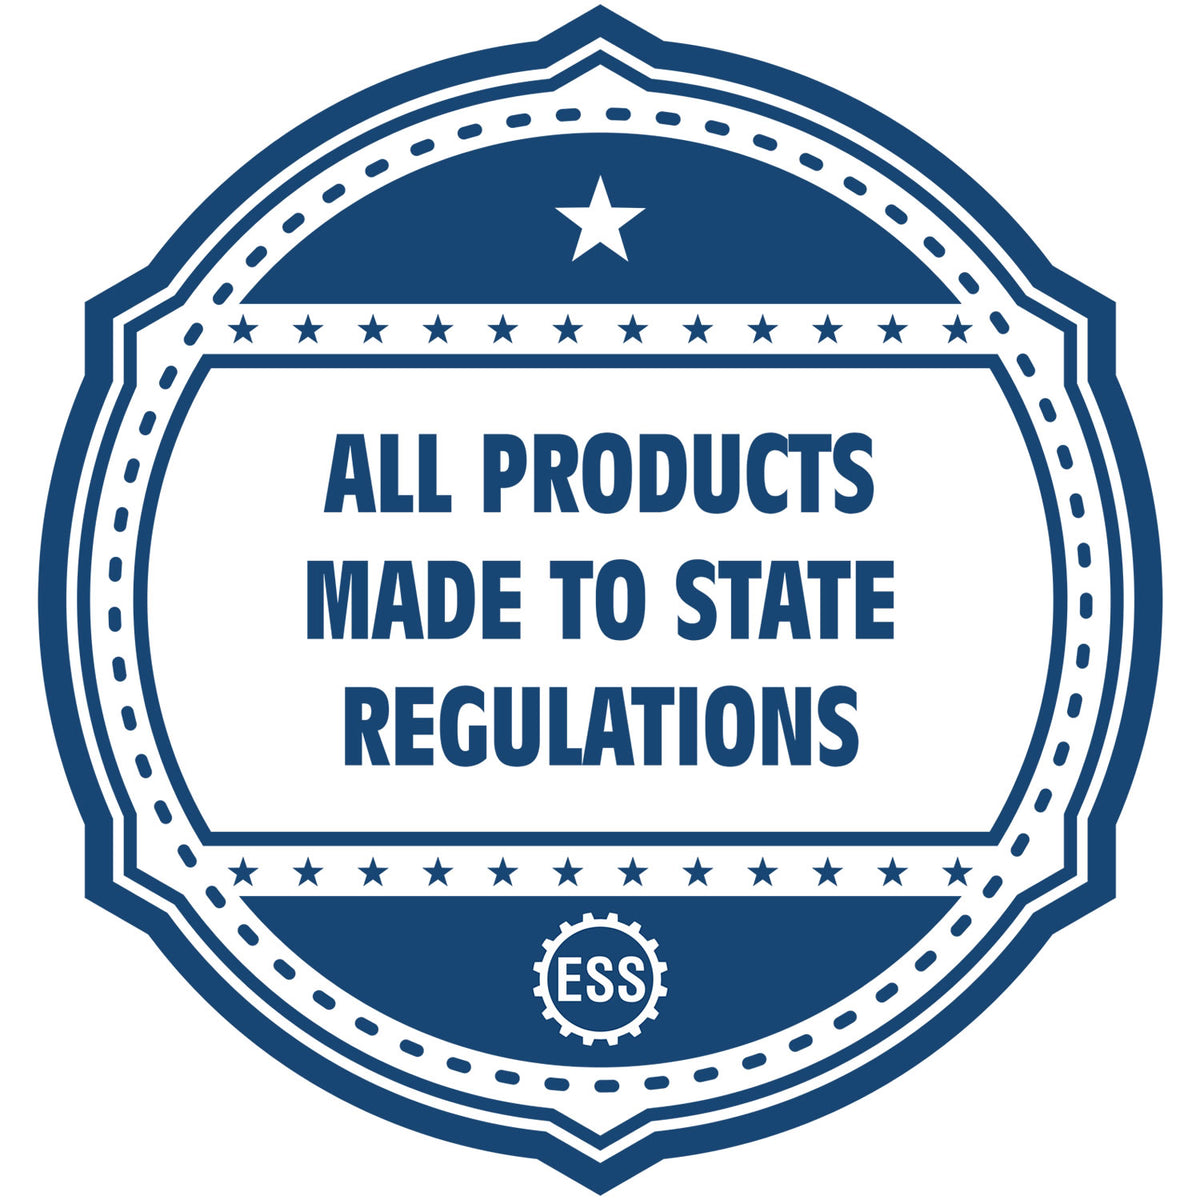 An icon or badge element for the Handheld Idaho Professional Engineer Embosser showing that this product is made in compliance with state regulations.